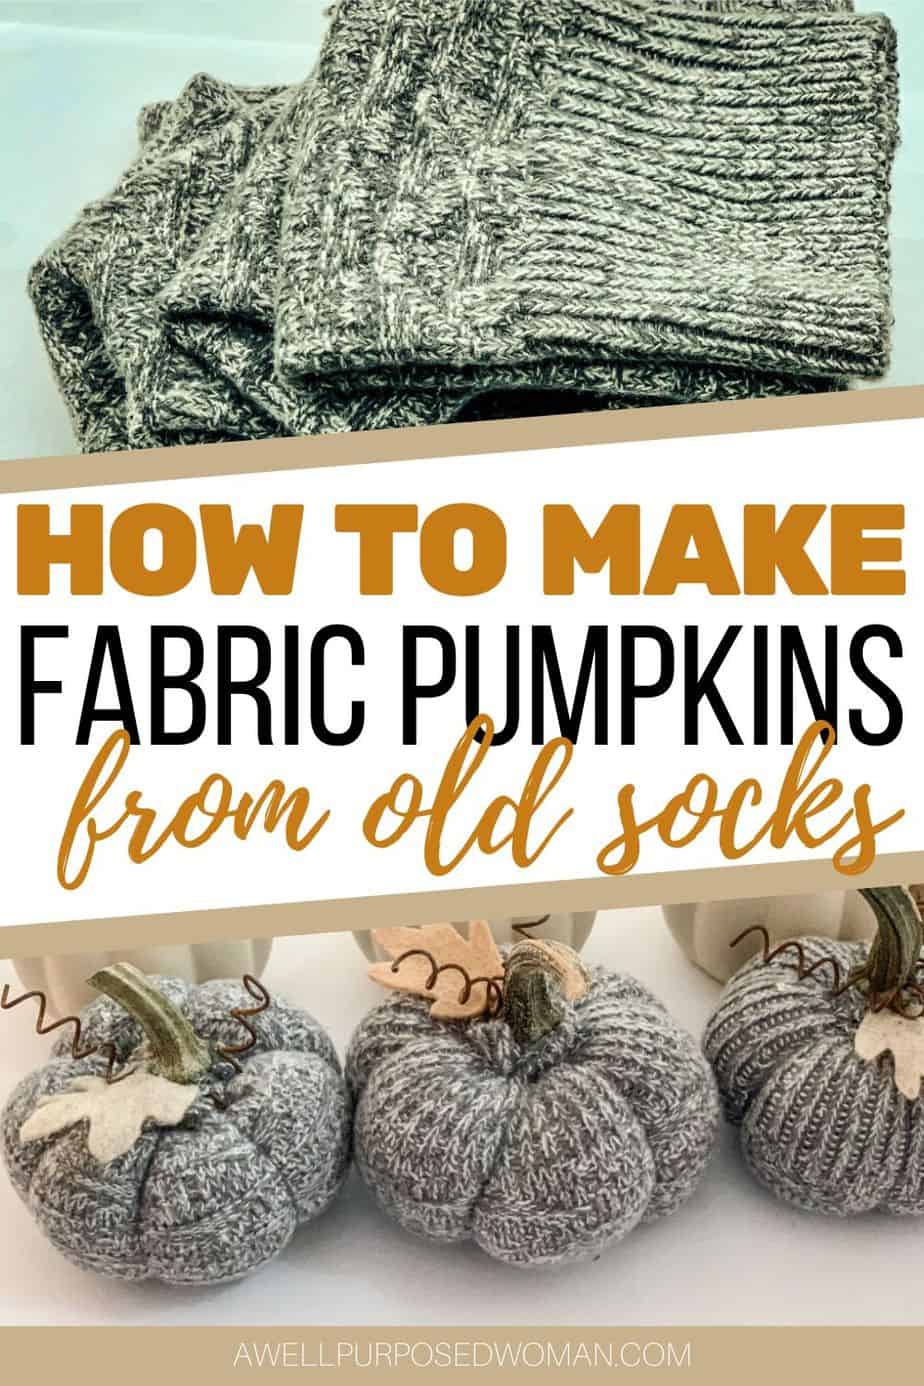 How to Make Fabric Pumpkins from Old Socks - A Well Purposed Woman